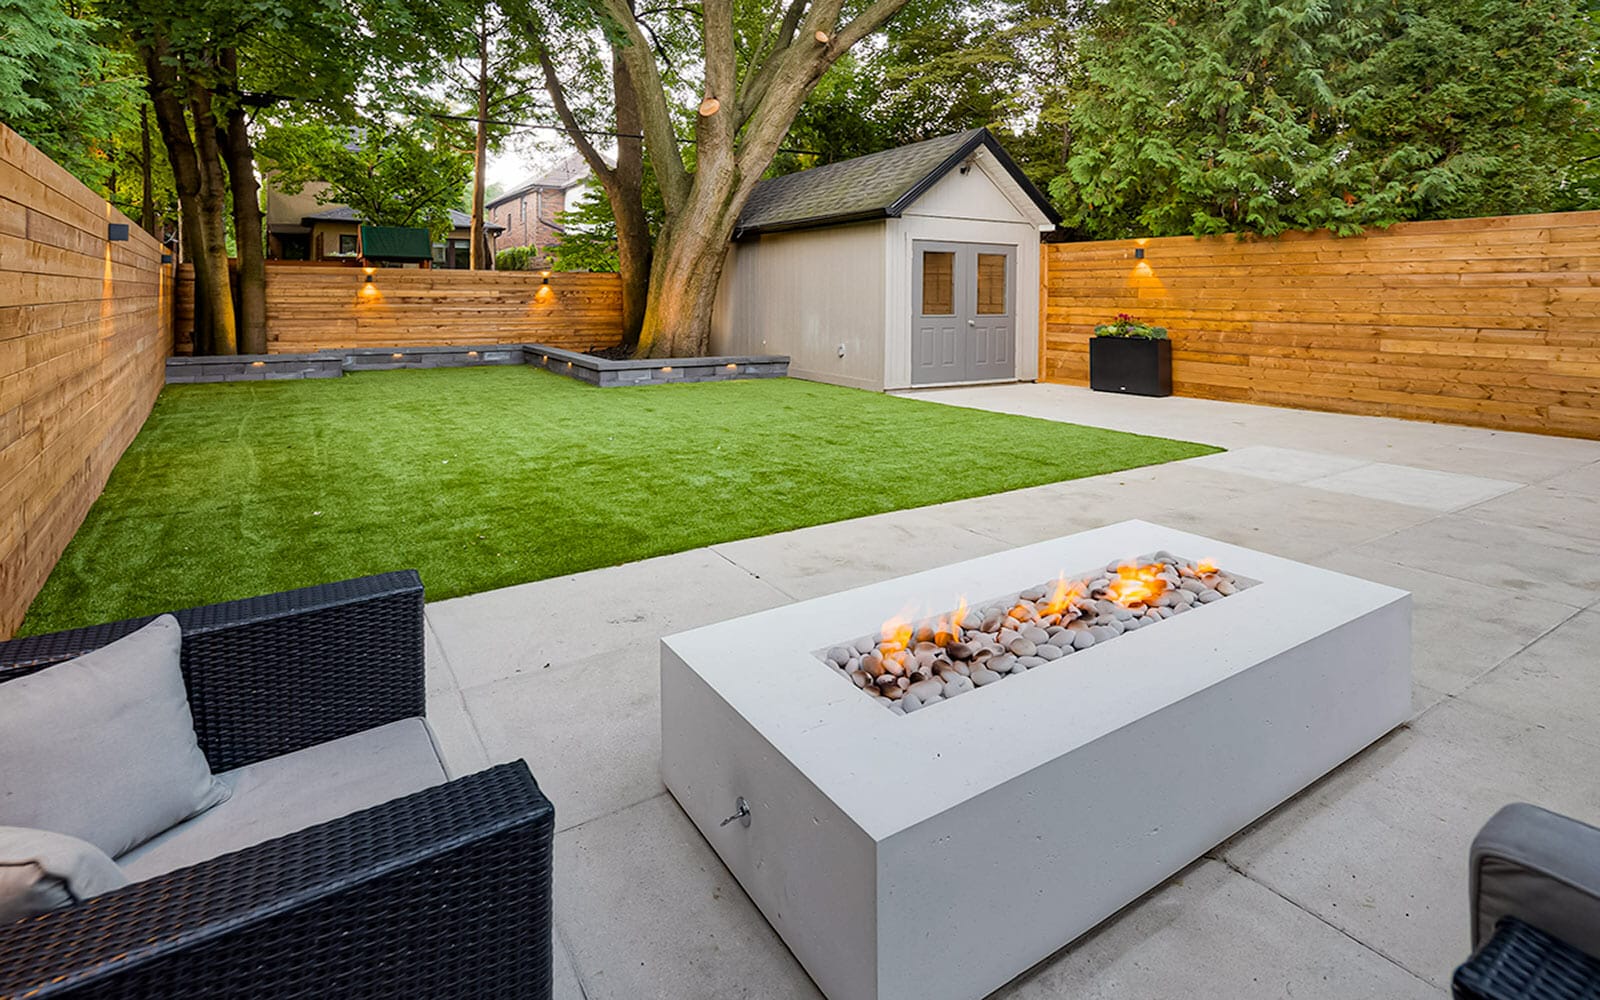 Complete Toronto Landscaping Project; Featuring Small Retaining Wall, Composite Deck Build with Stainless Steel Glass Railings, Interlocking & Outdoor Fireplace by Toronto Landscaping Company.